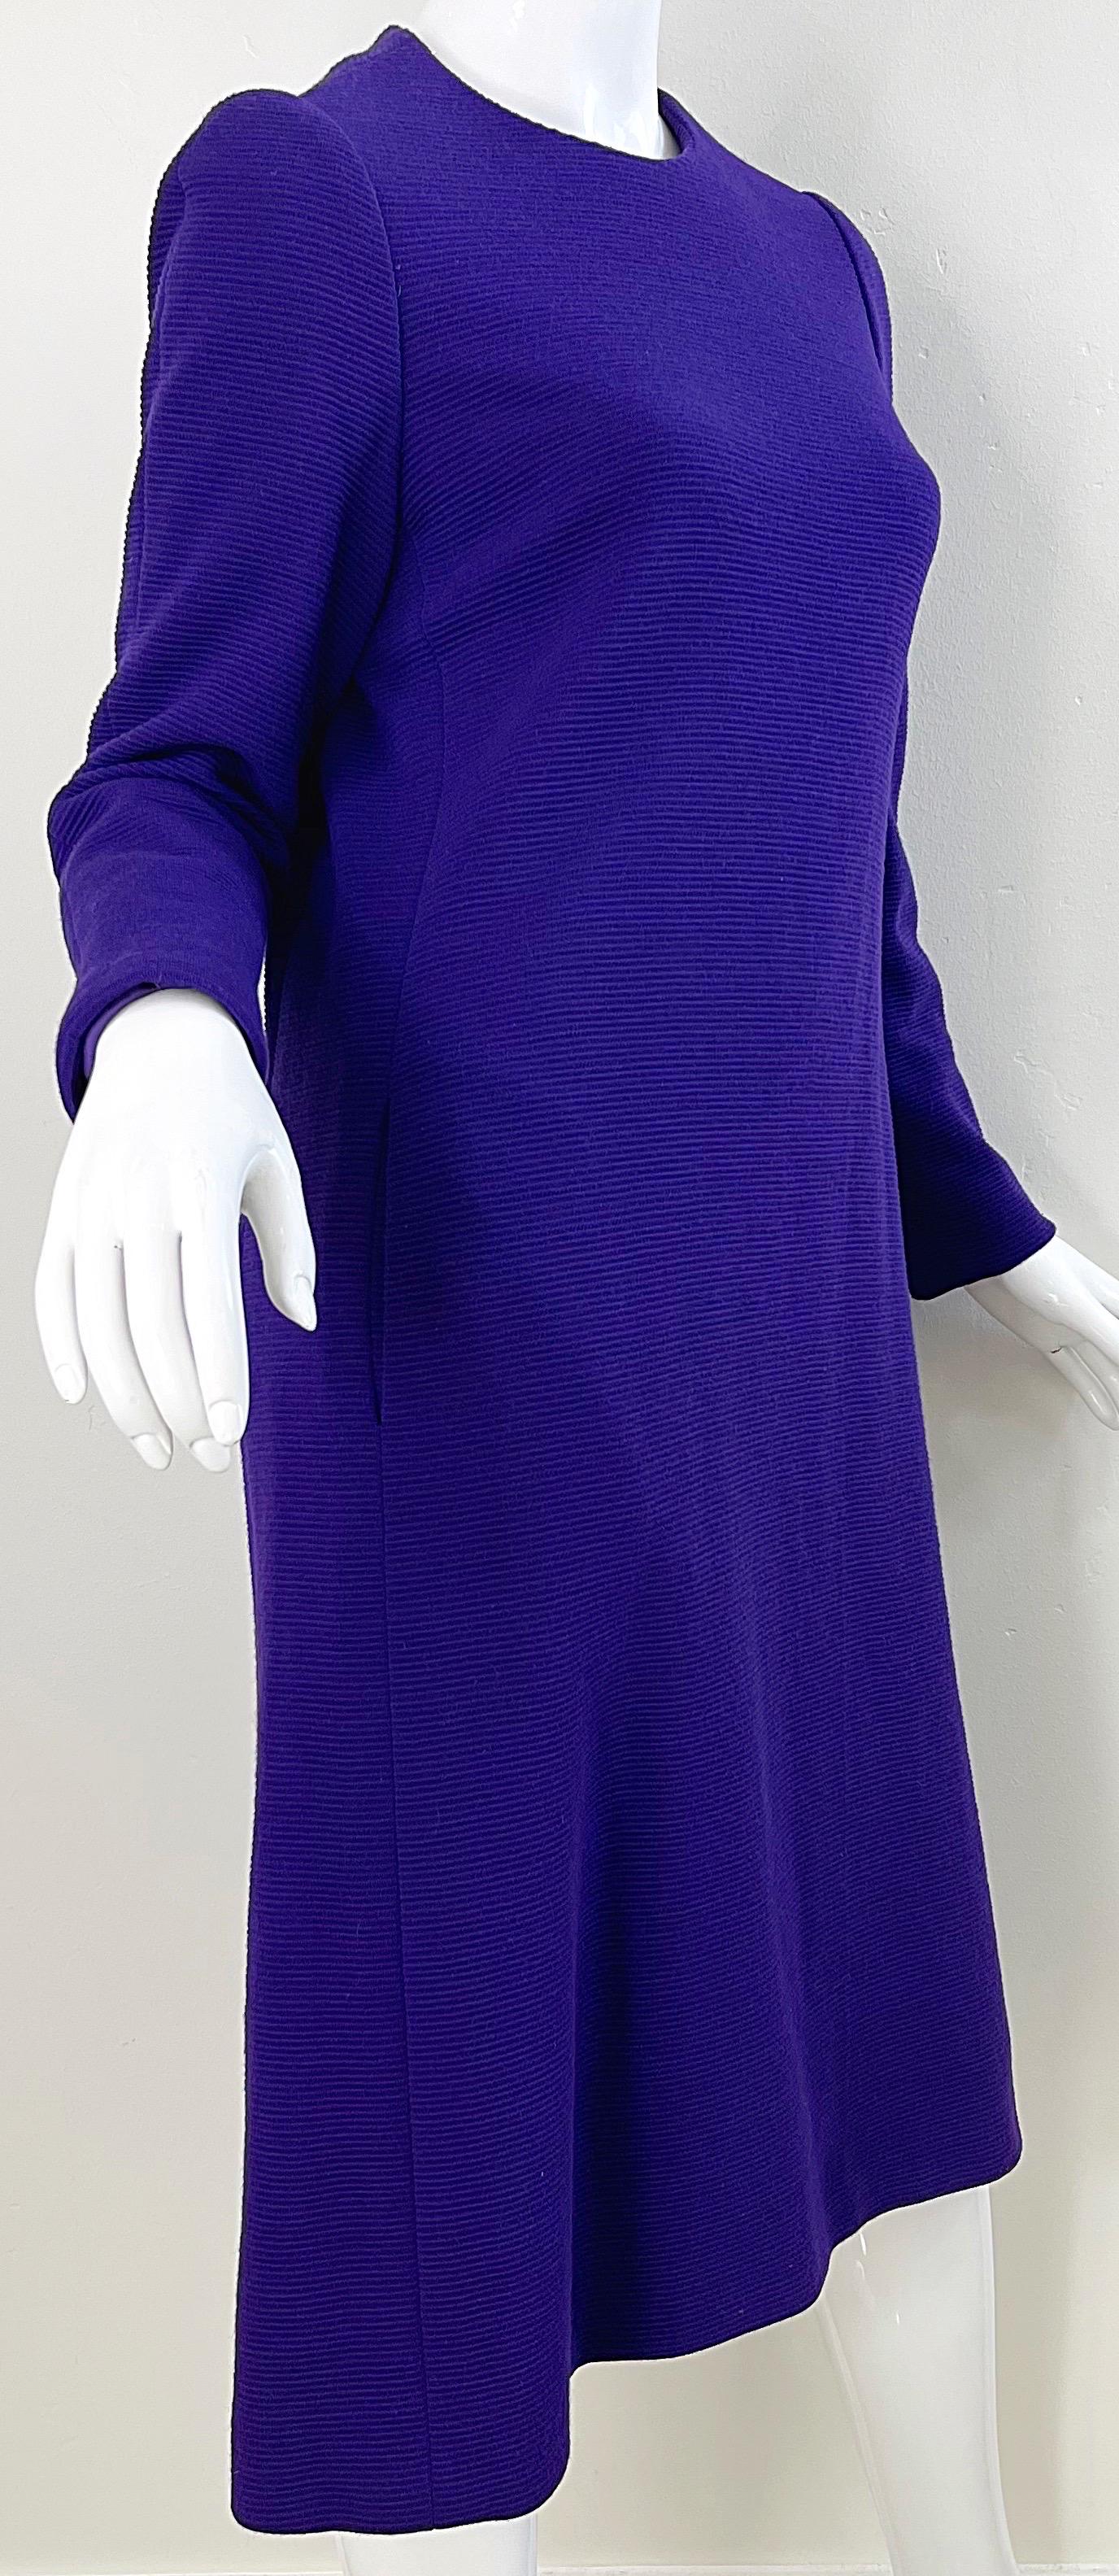 1970s Halston Purple Wool Long Sleeve Vintage Chic 70s Tailored Dress For Sale 2